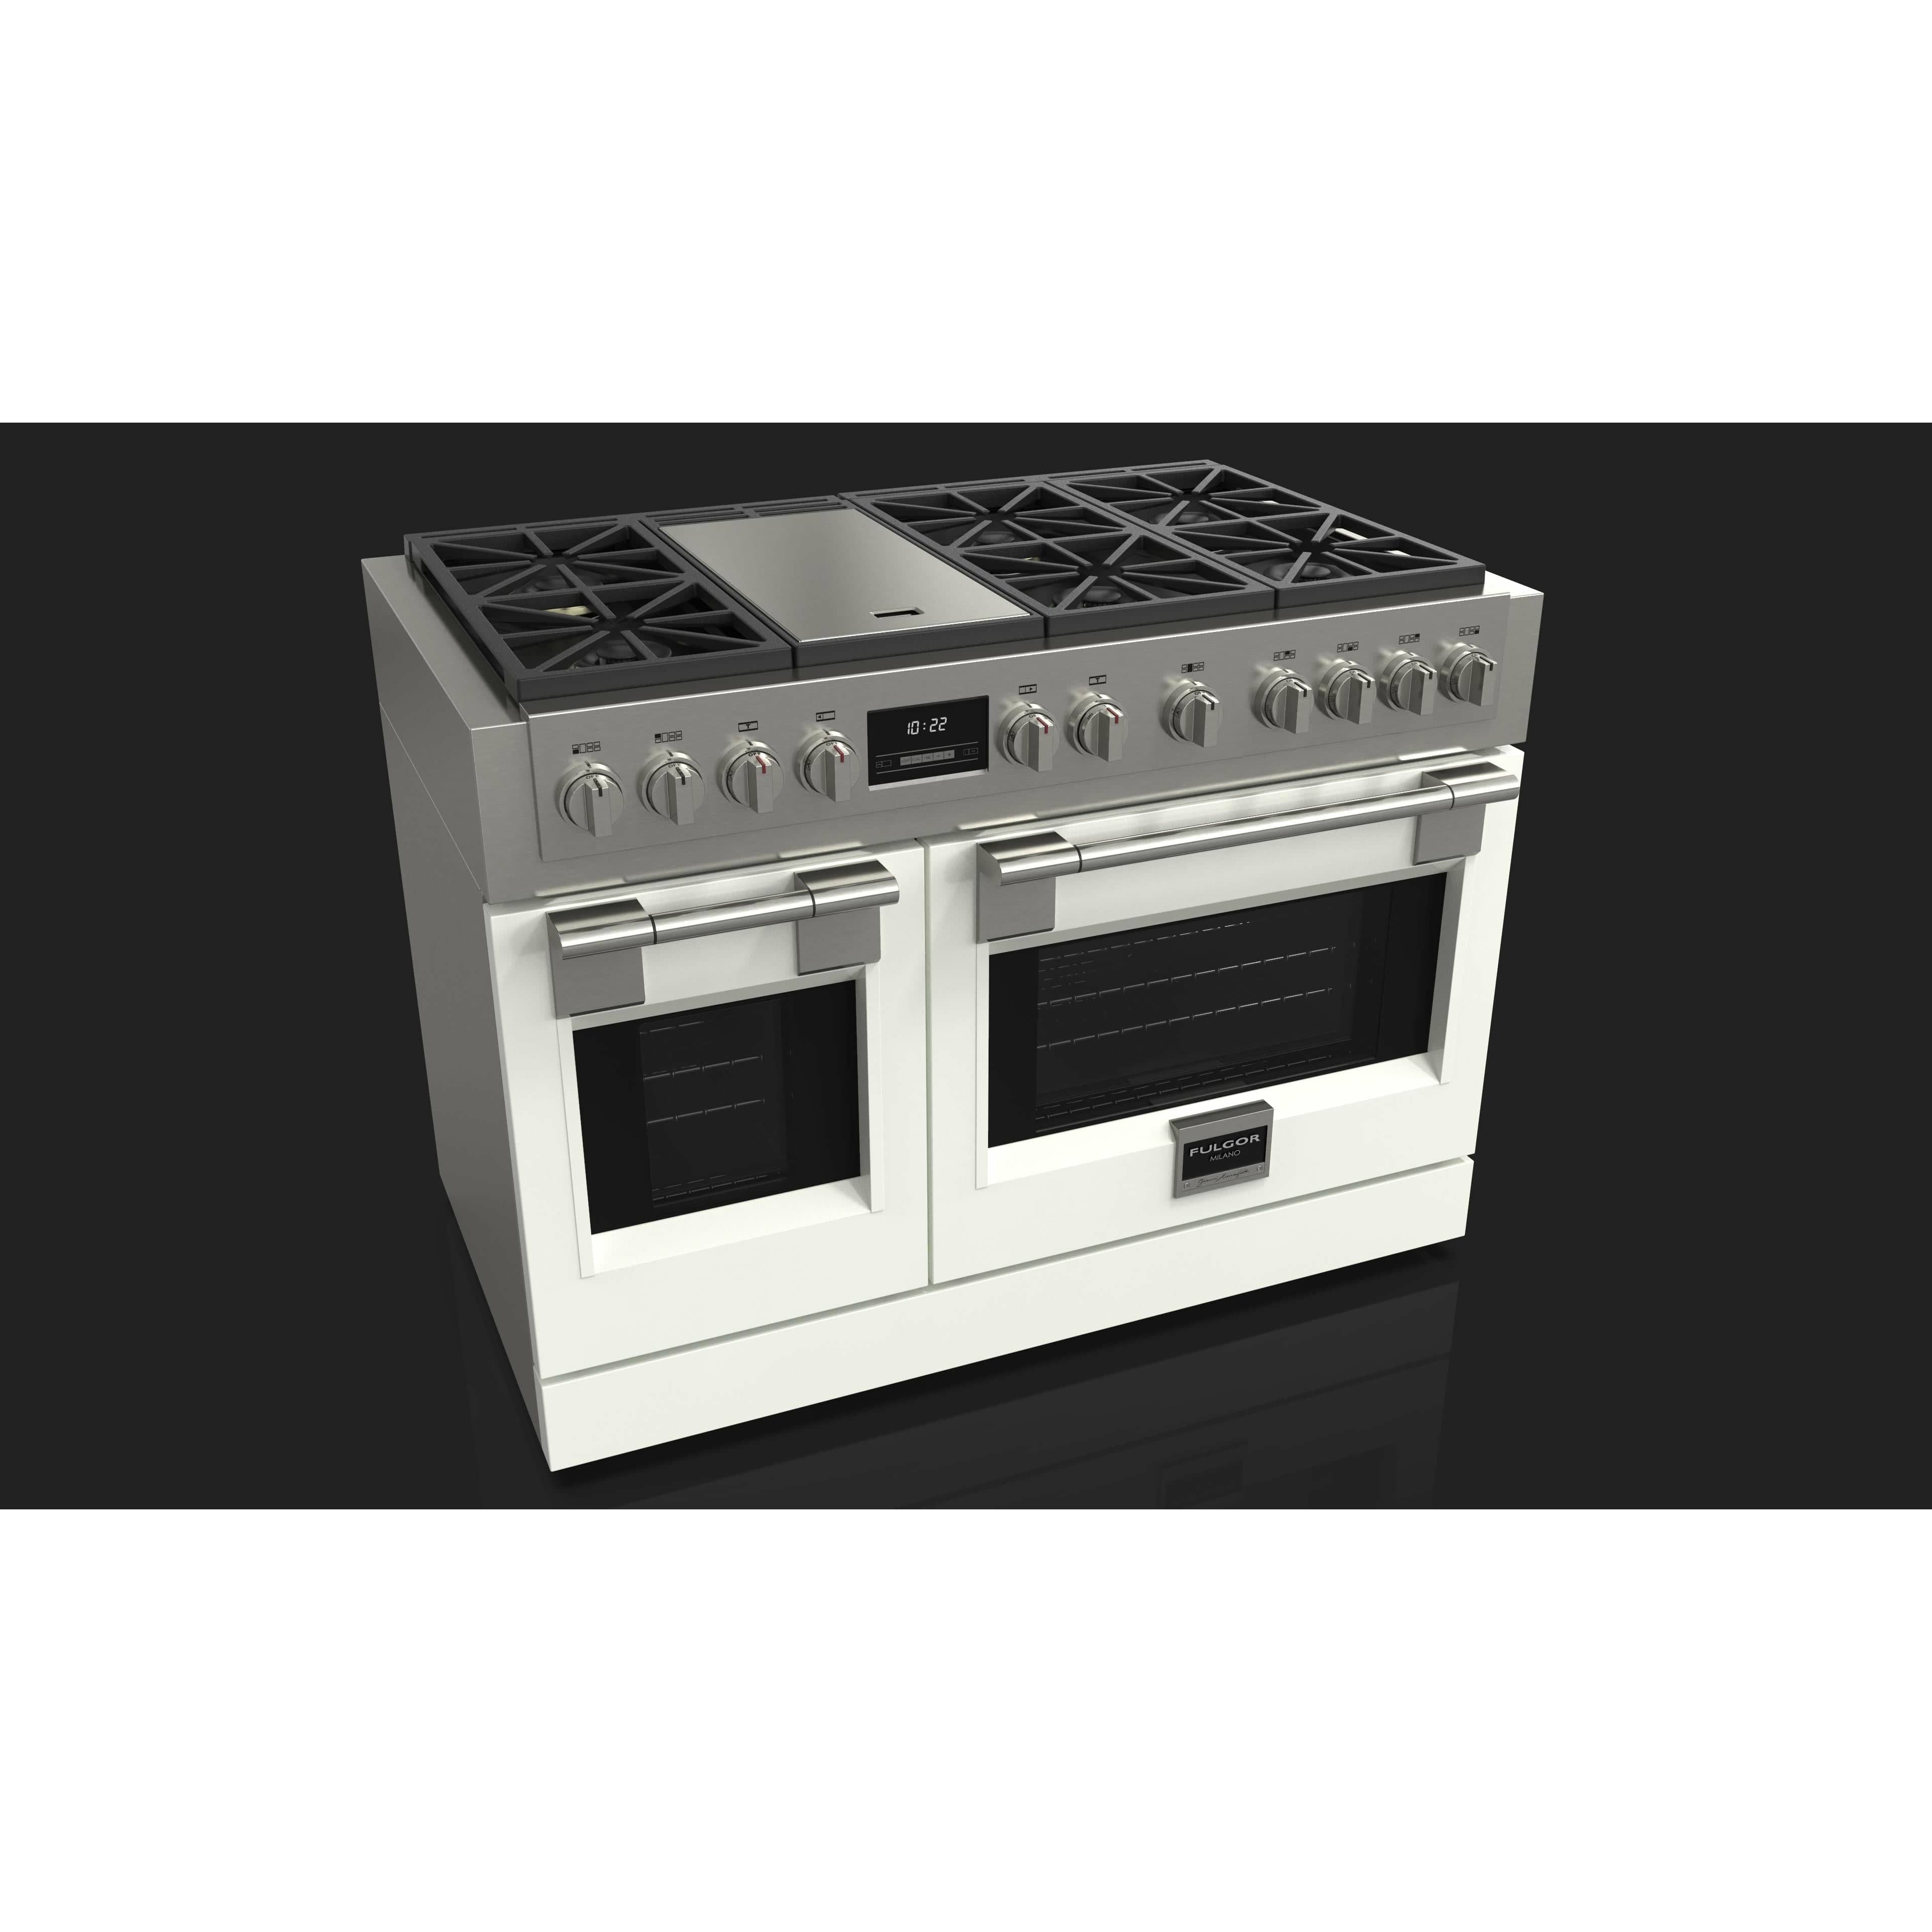 Fulgor Milano 48" Freestanding Professional All Gas Range with 6 Dual Flame Sealed Burners, Stainless Steel - F6PGR486GS2 Ranges PDRKIT48WH Luxury Appliances Direct